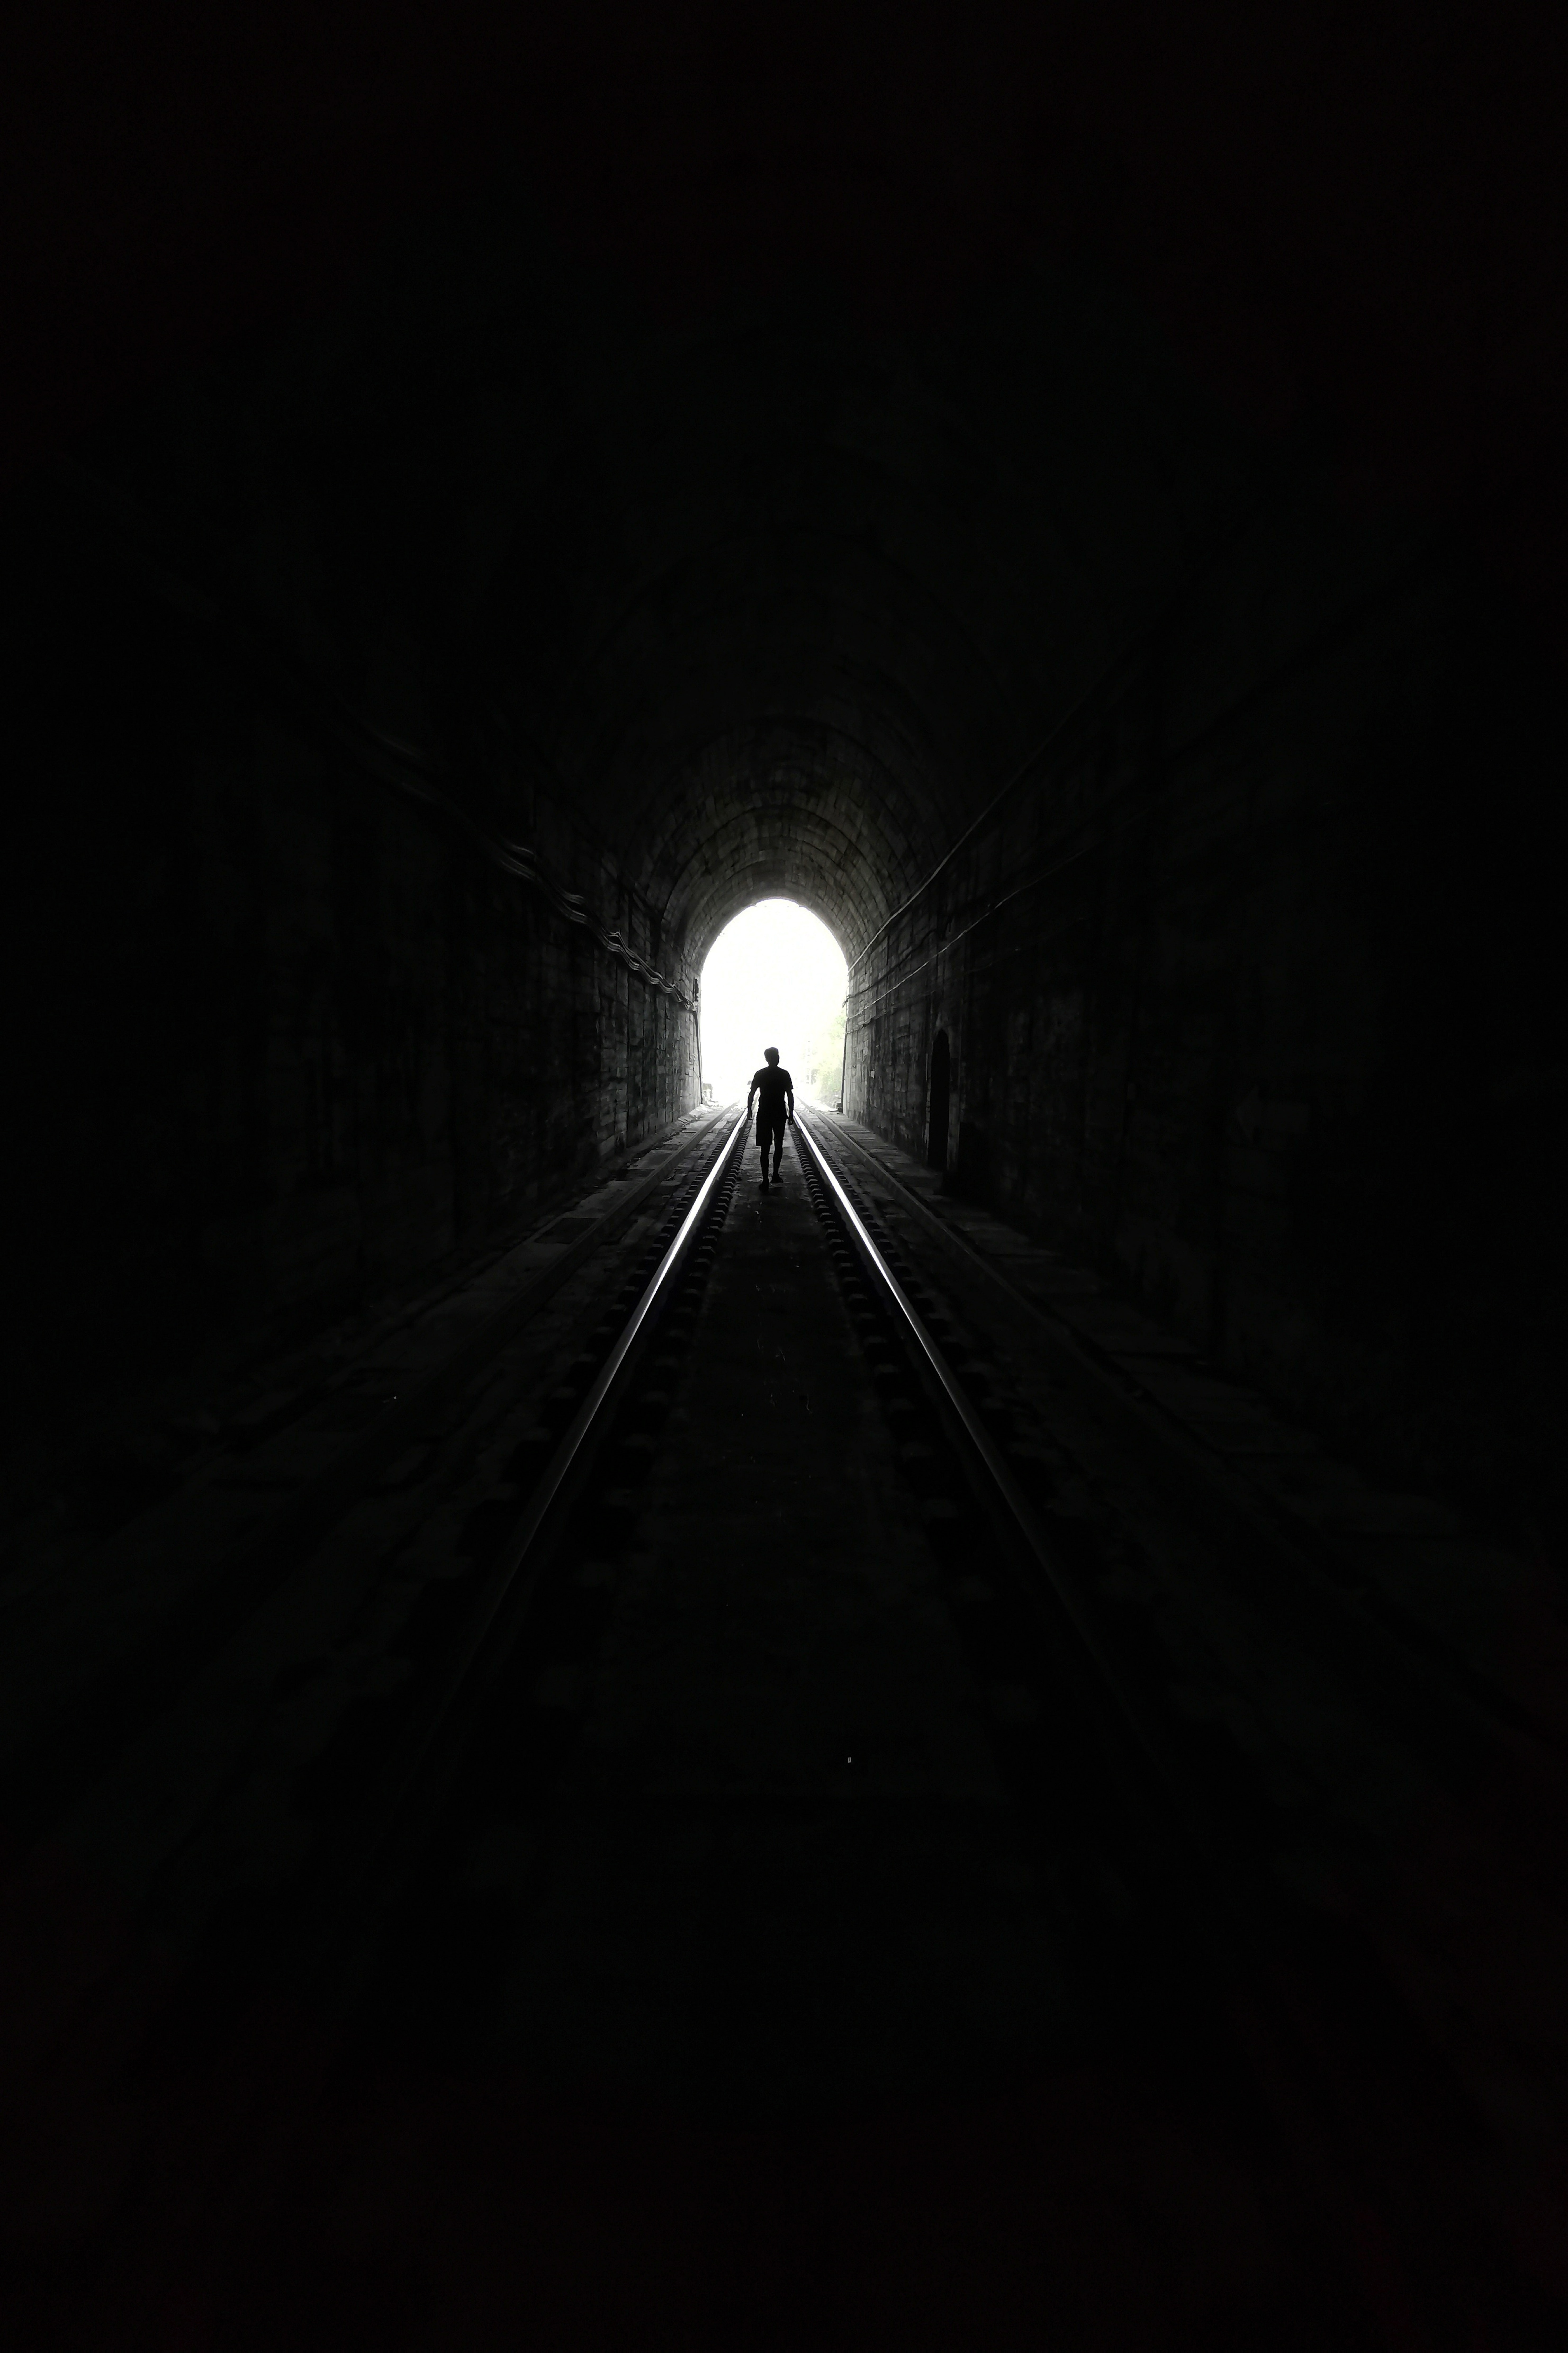 black, bw, silhouette, chb, human, person, tunnel cell phone wallpapers